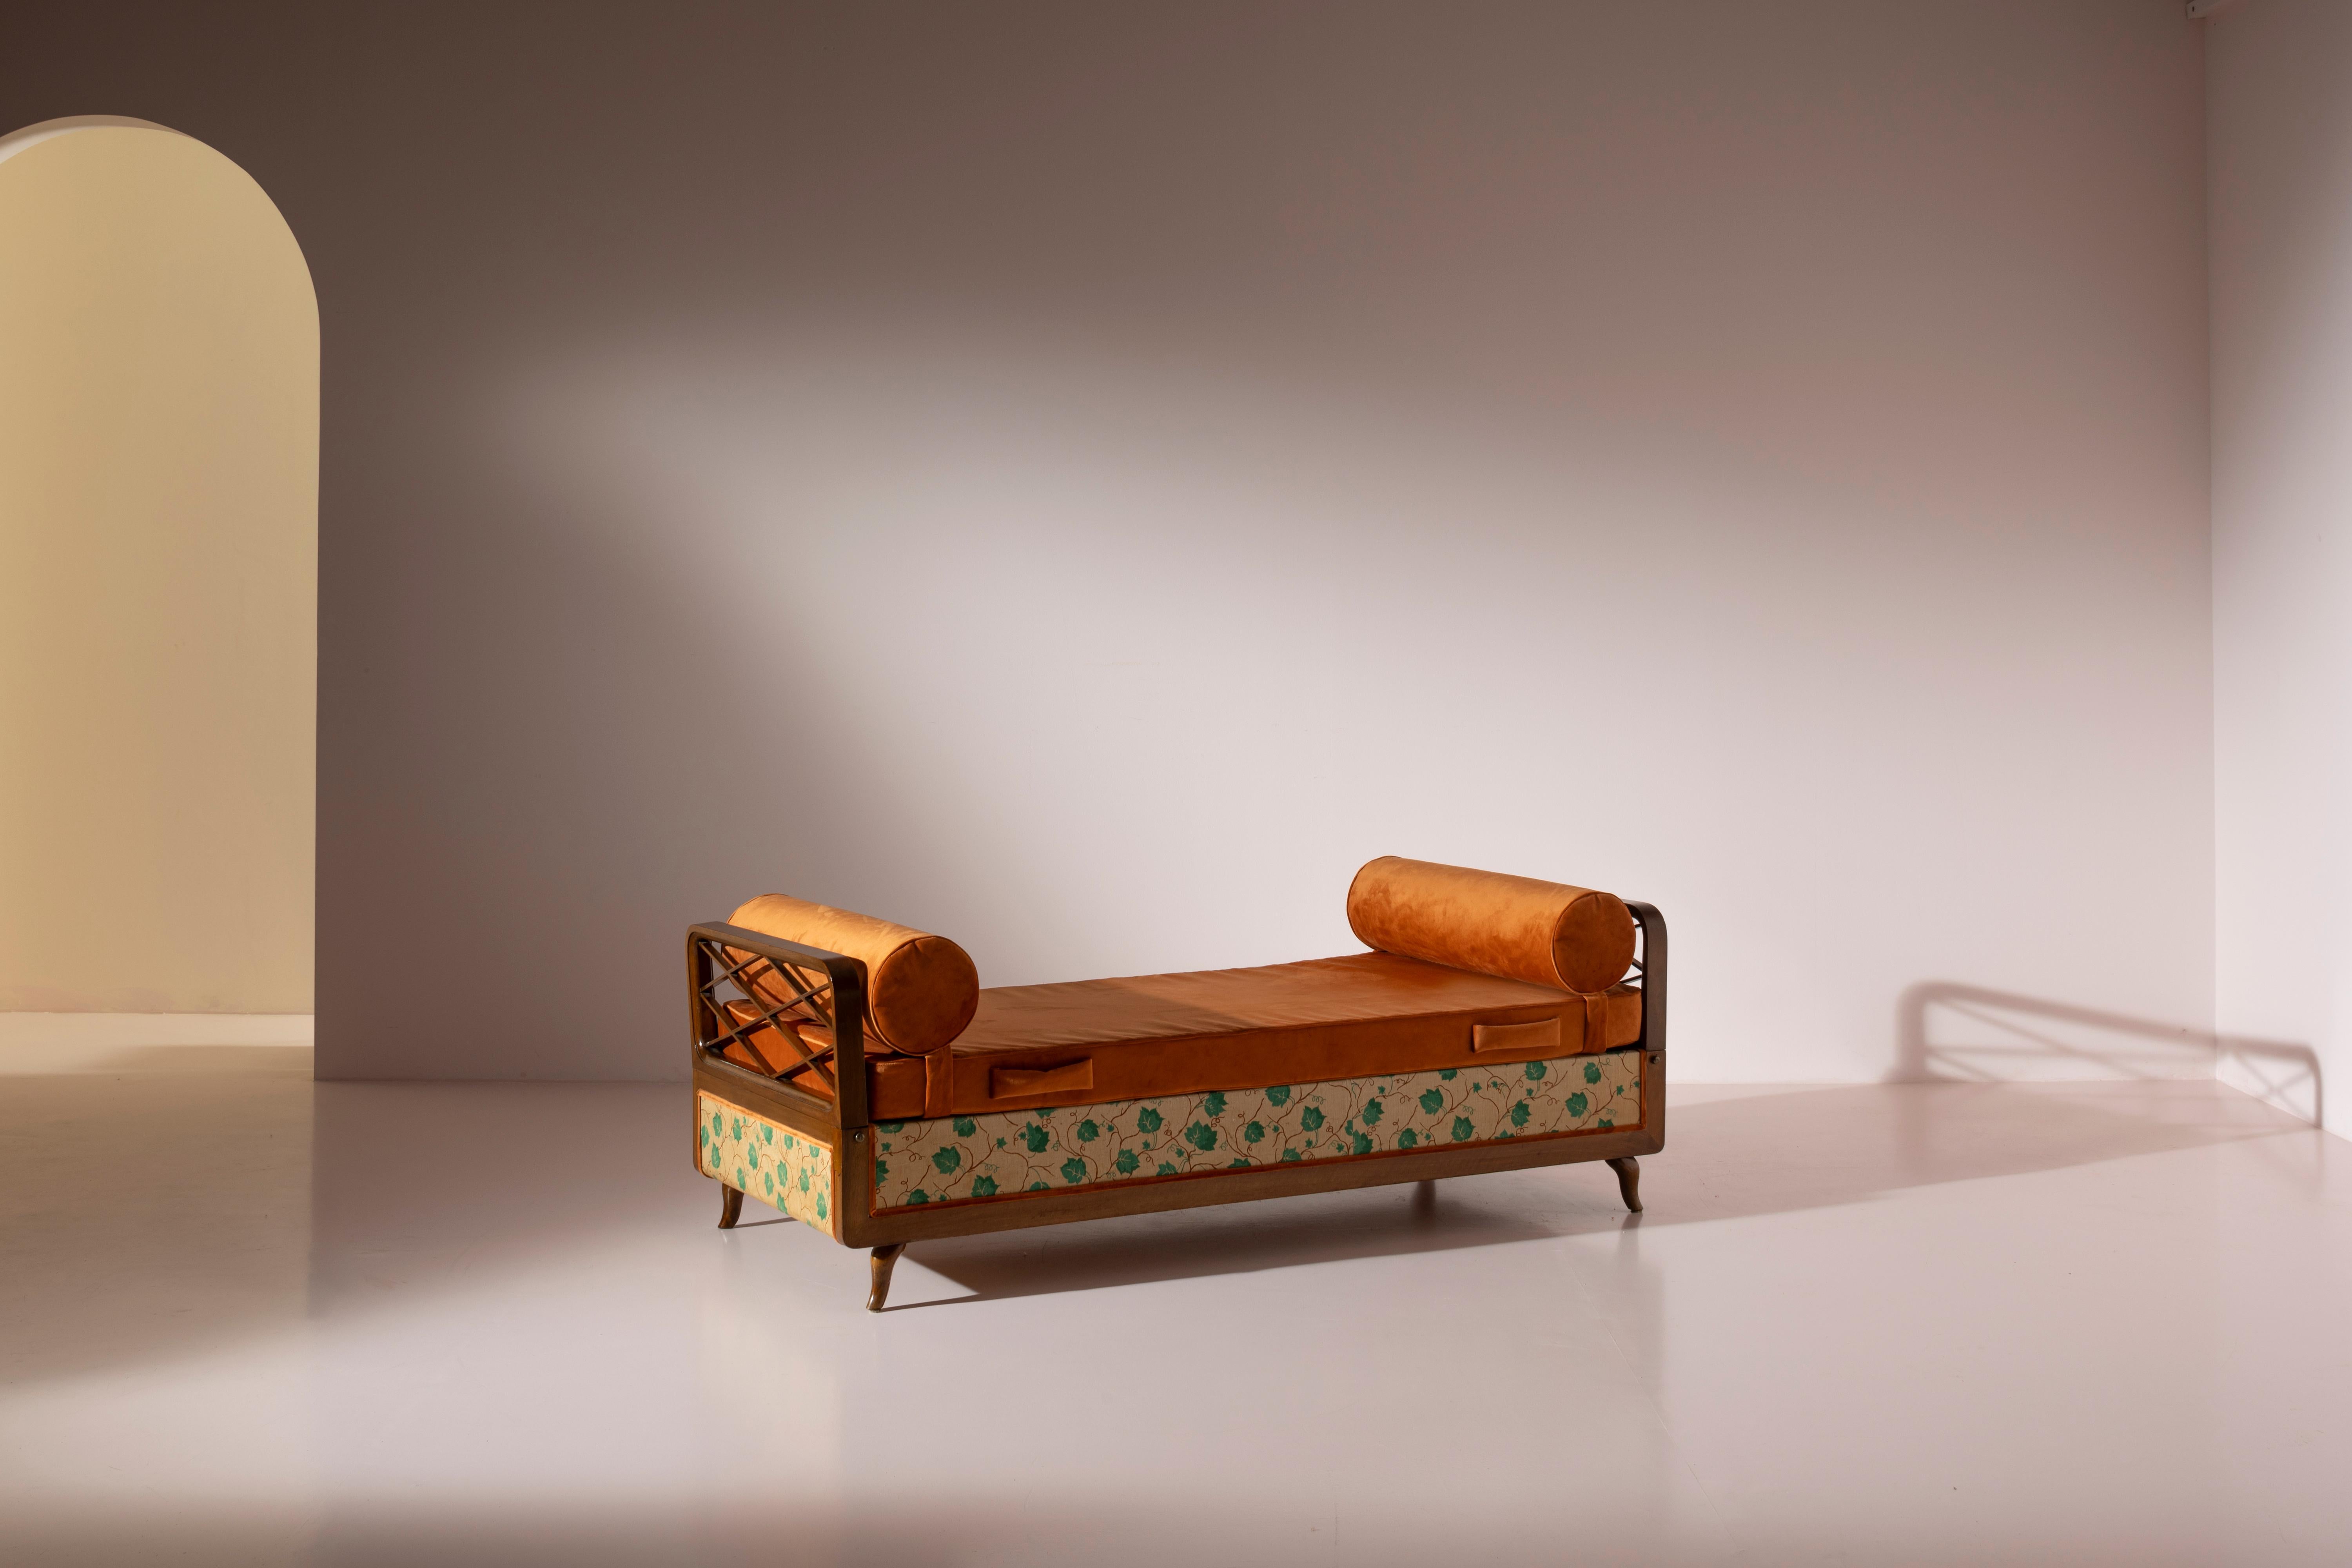 Wood and fabric daybed with storage compartment and foldable armrests in the style of Paolo Buffa, Italian craftsmanship, 1950s.

This piece of furniture embodies the design trends of the 1940s and 1950s. A curious mix of curved lines and right